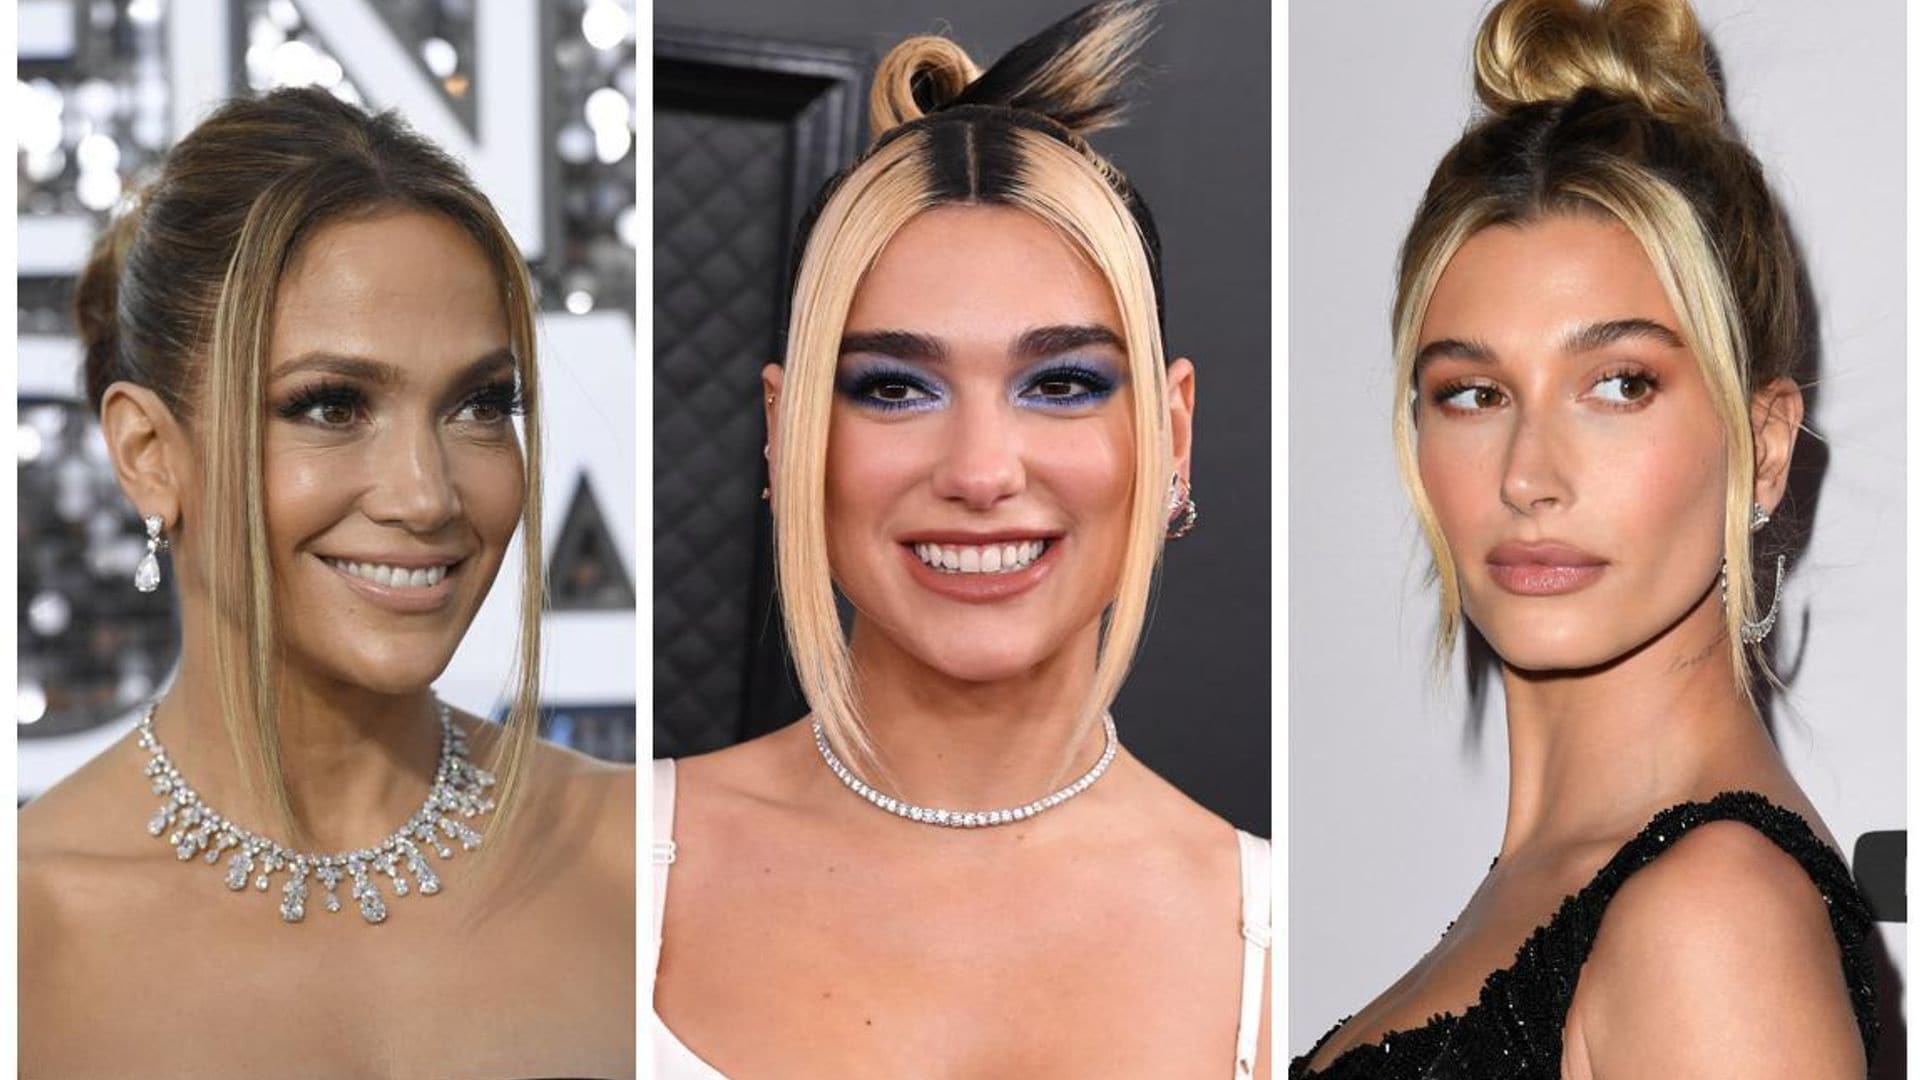 Jennifer Lopez, Hailey Bieber and more stars have us wanting to try this 90s hair trend again